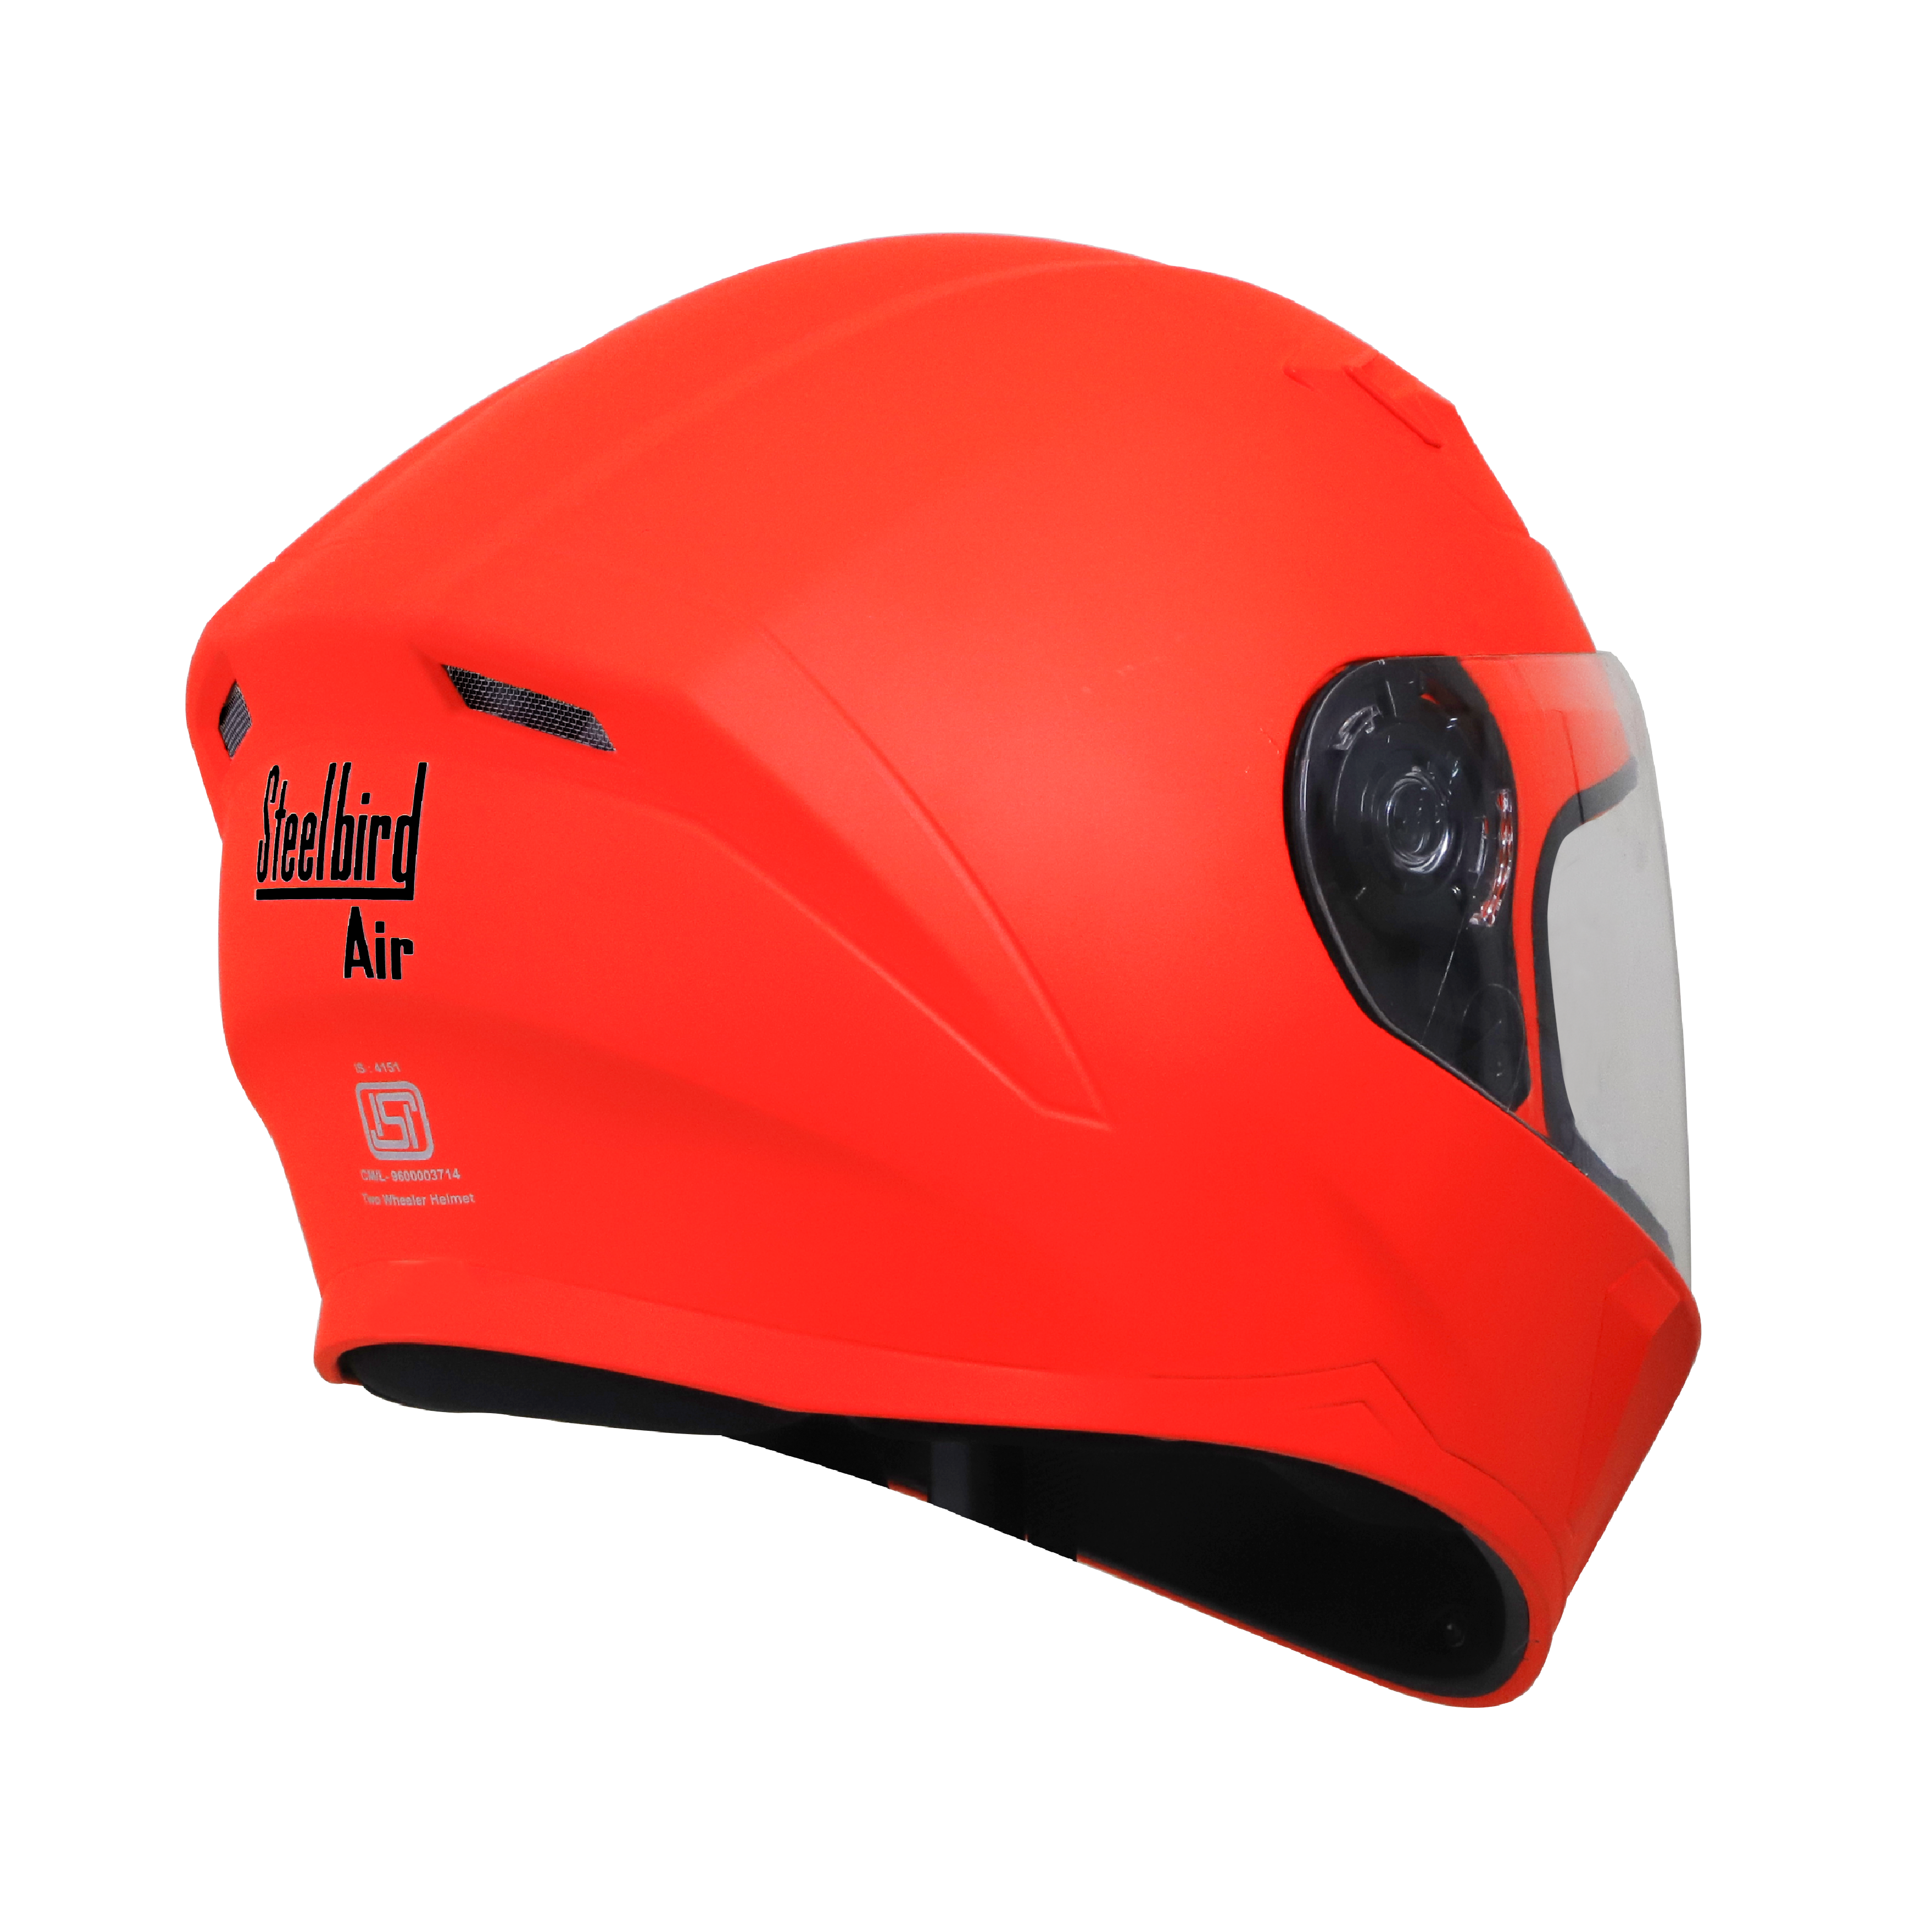 Steelbird SBA-21 GT Full Face ISI Certified Helmet (Glossy Fluo Red With Clear Visor)